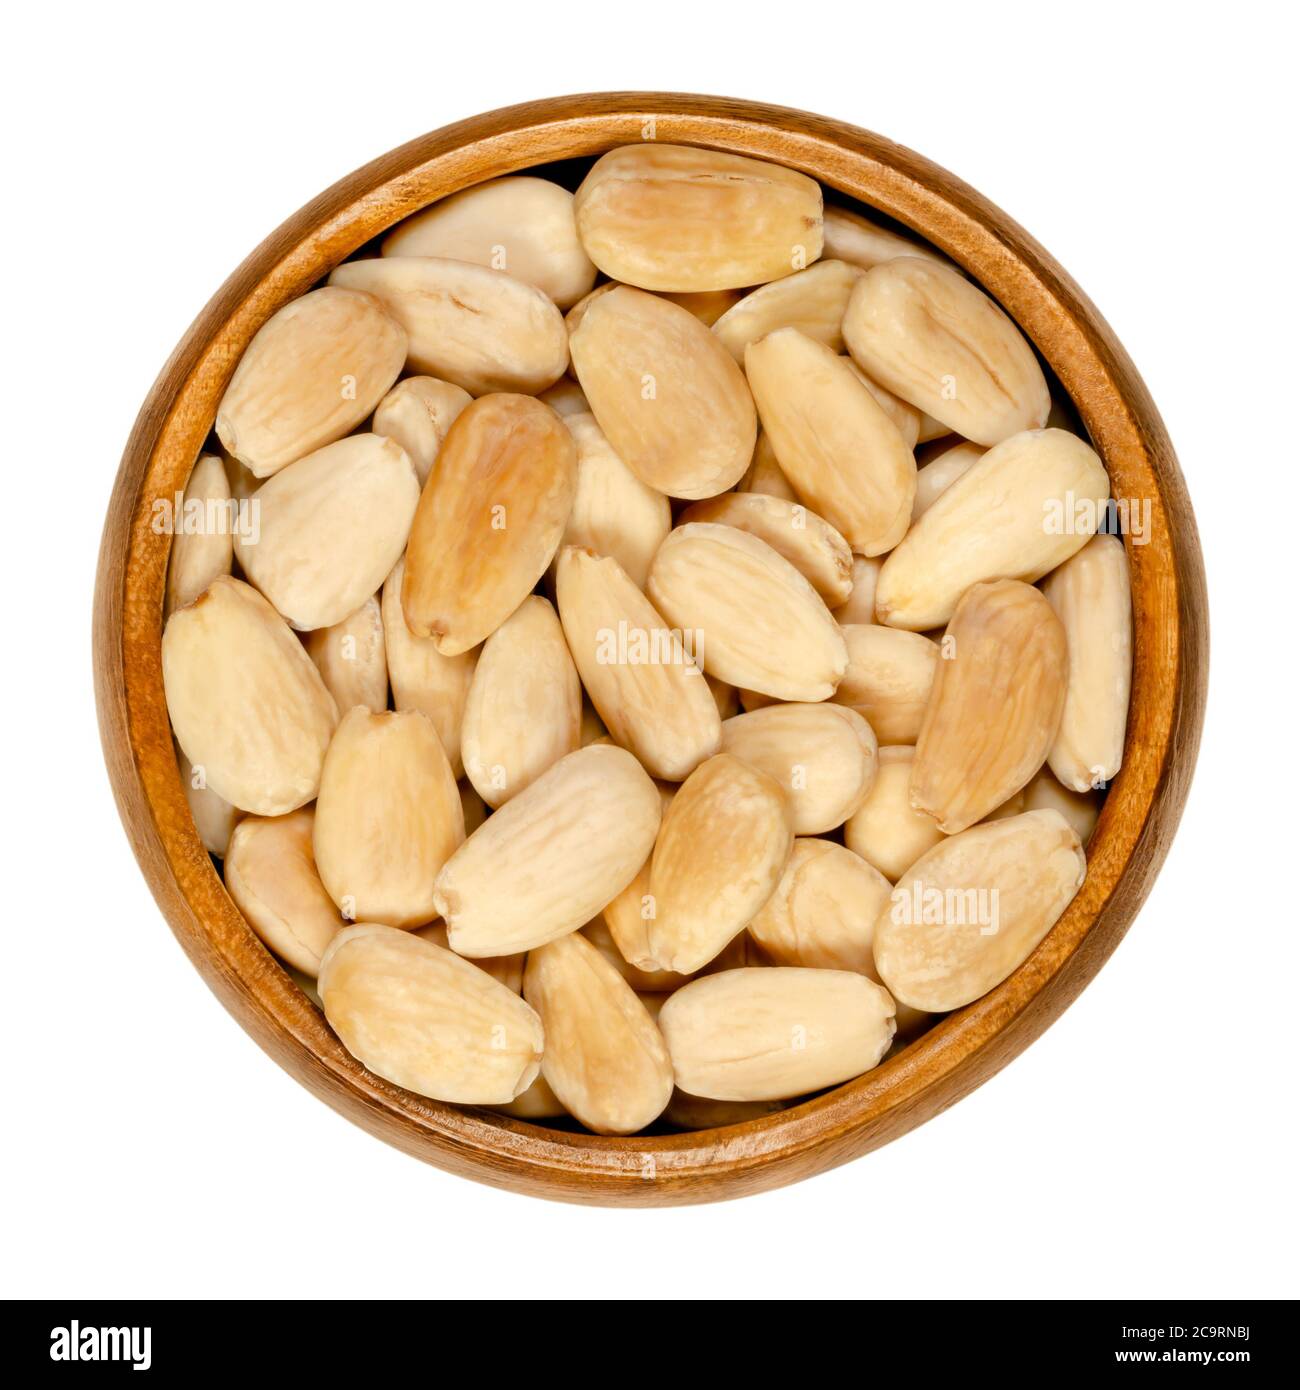 Blanched and roasted almonds in a wooden bowl. Whole seeds, skinned and roasted, ready to eat as snack or dessert. Prunus dulcis. Close-up, from above Stock Photo